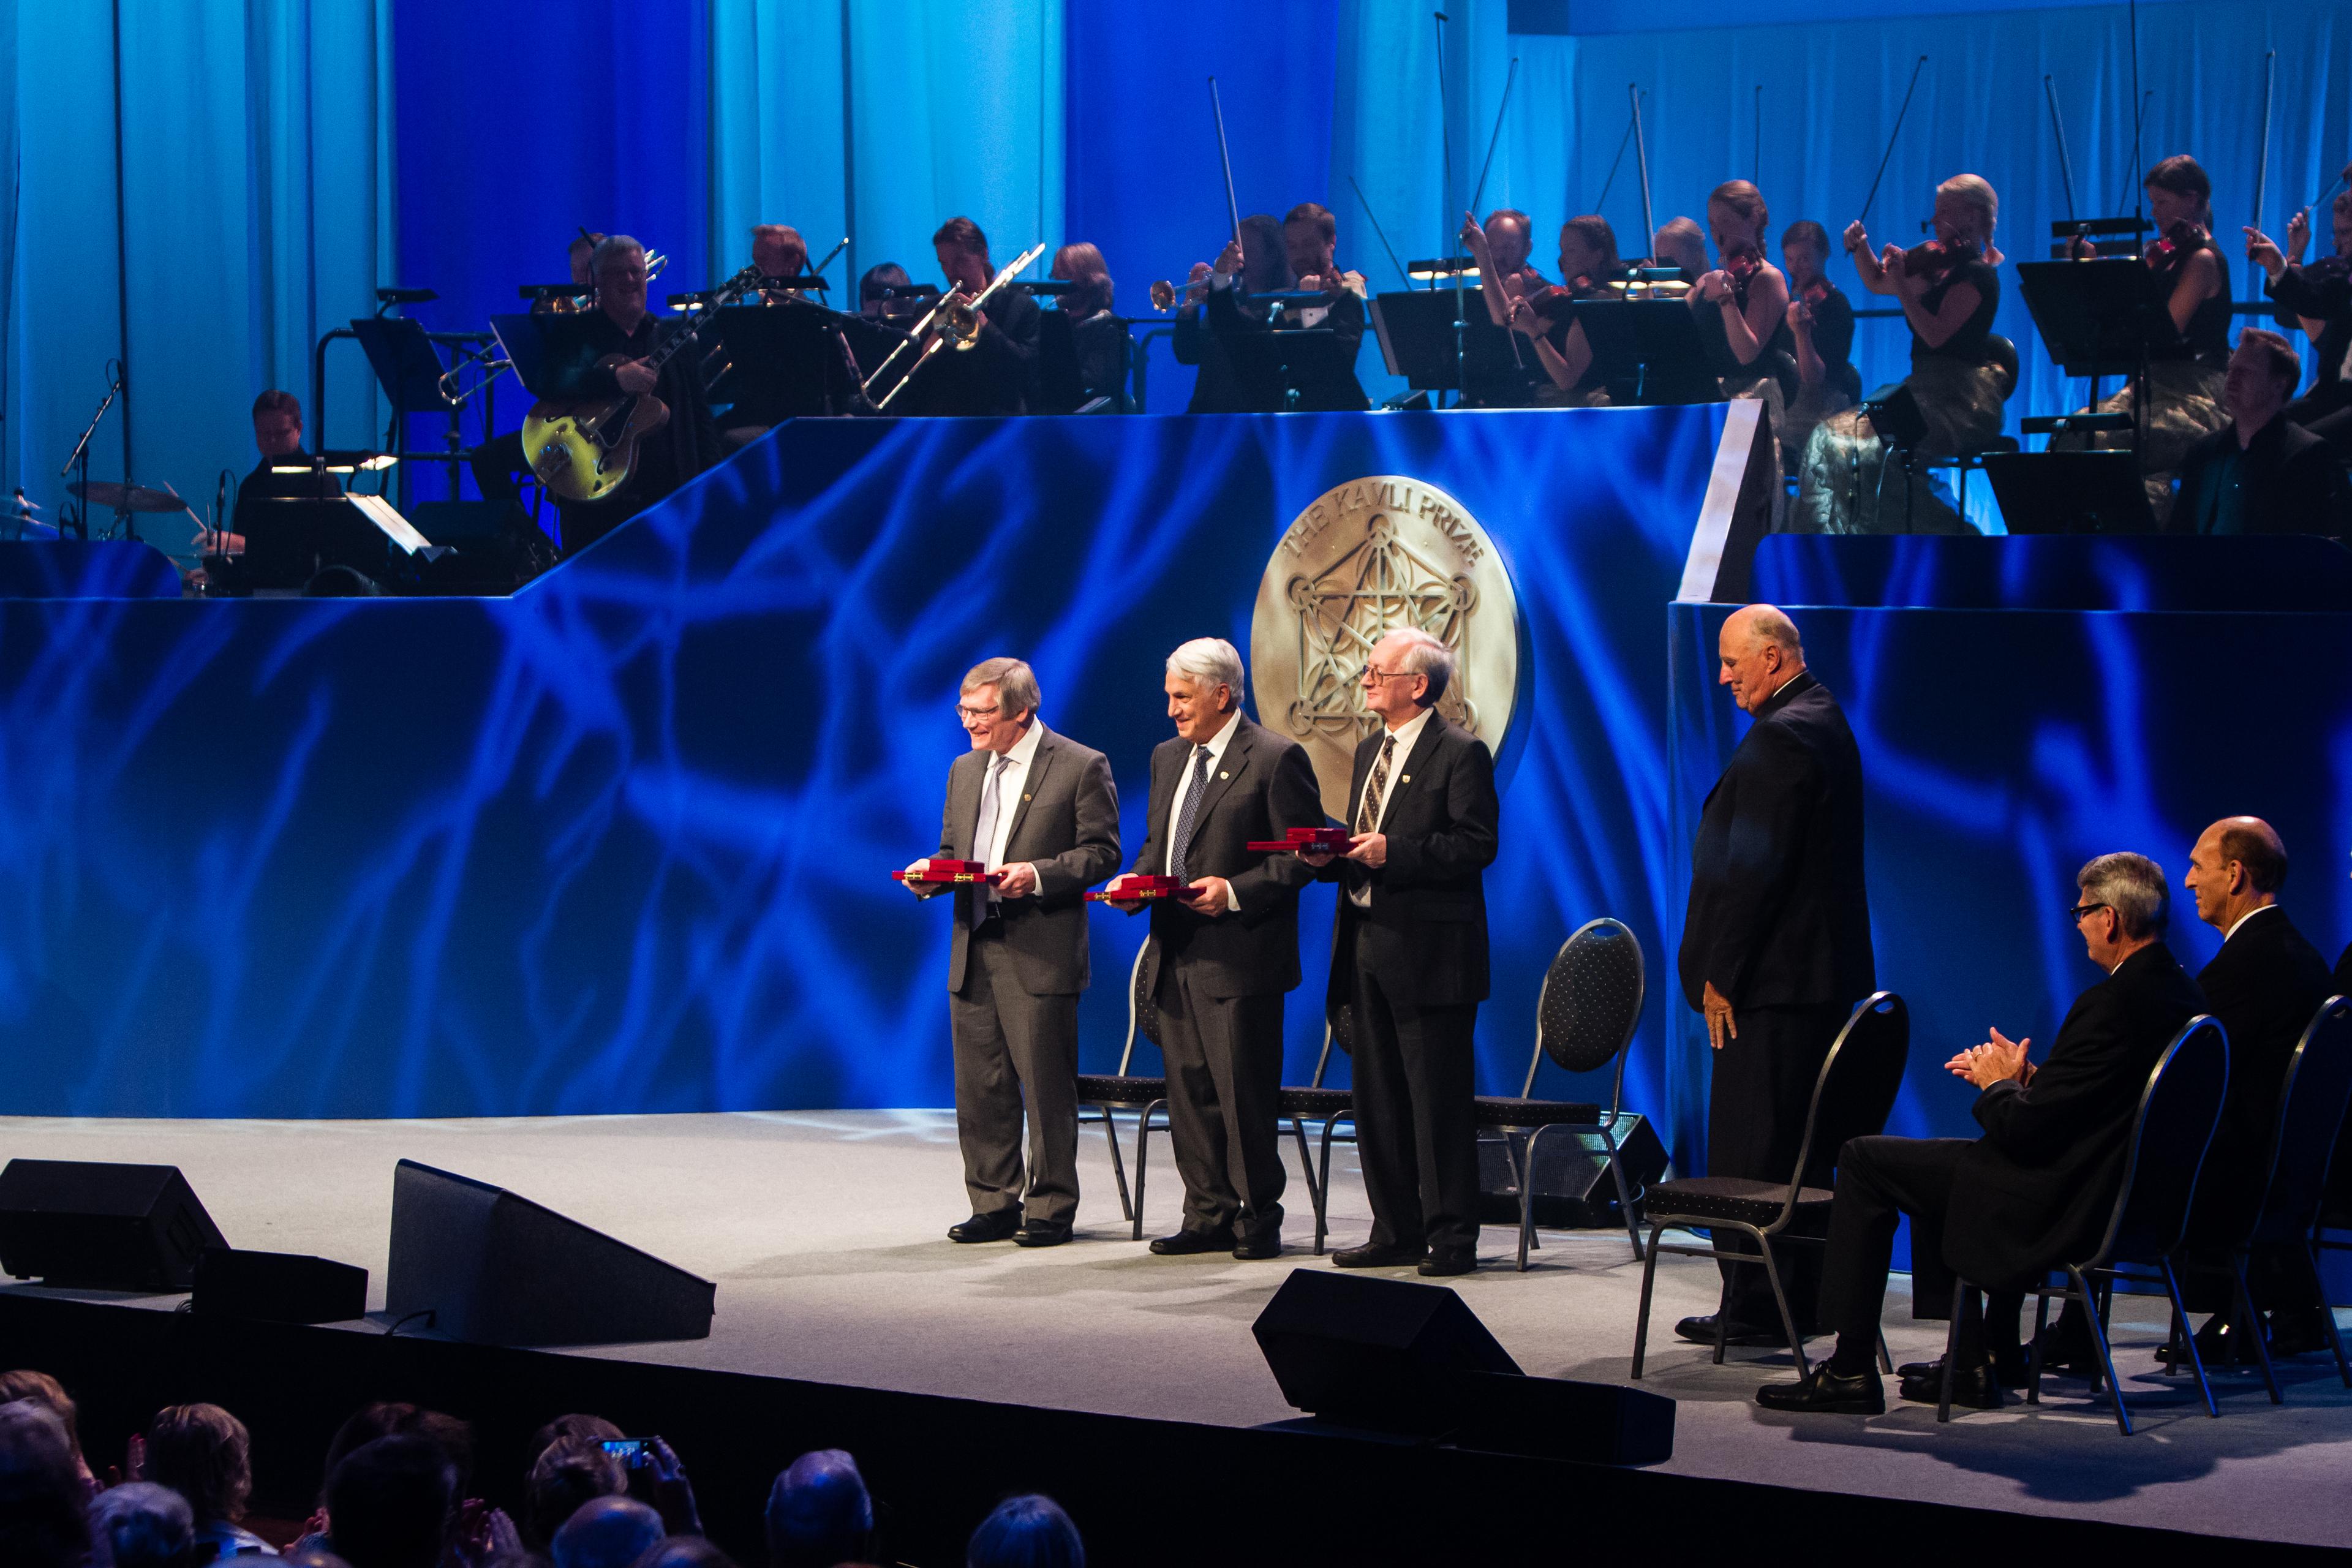 All the three 2014 astrophysics Kavli Prize laureates on stage at the prize ceremony in Oslo together with His Royal Highness King Harald 